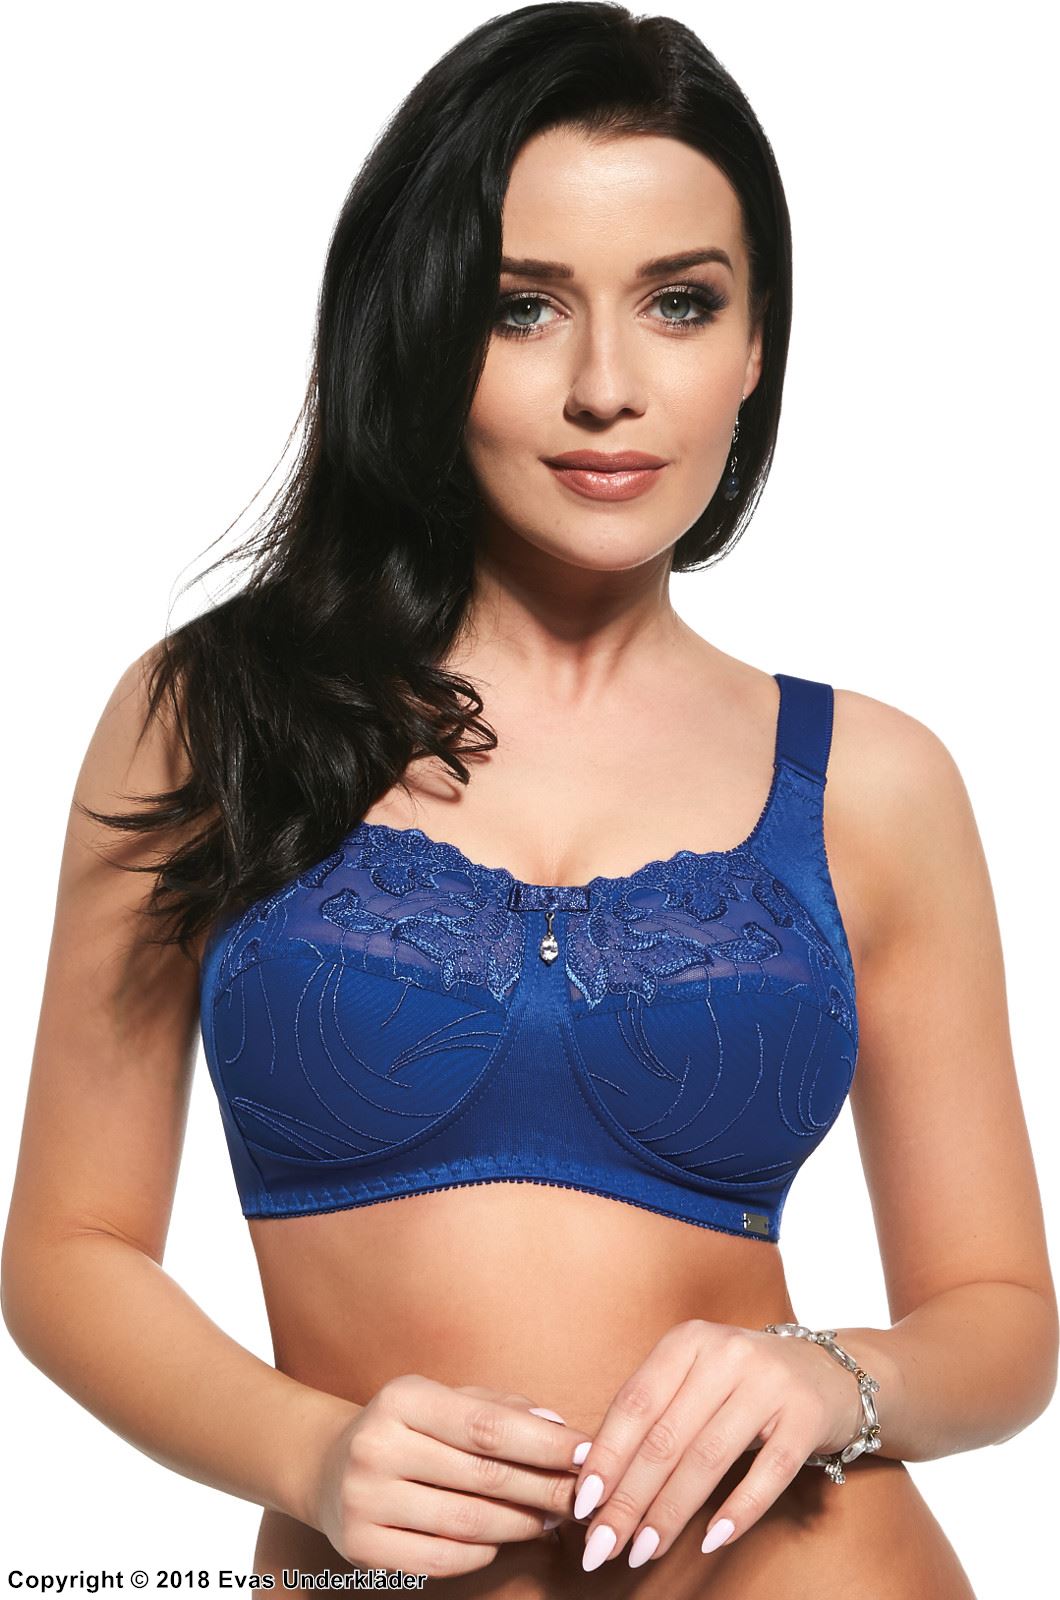 Comfortable full cup bra, mesh, wide shoulder straps, floral lace, B to I-cup